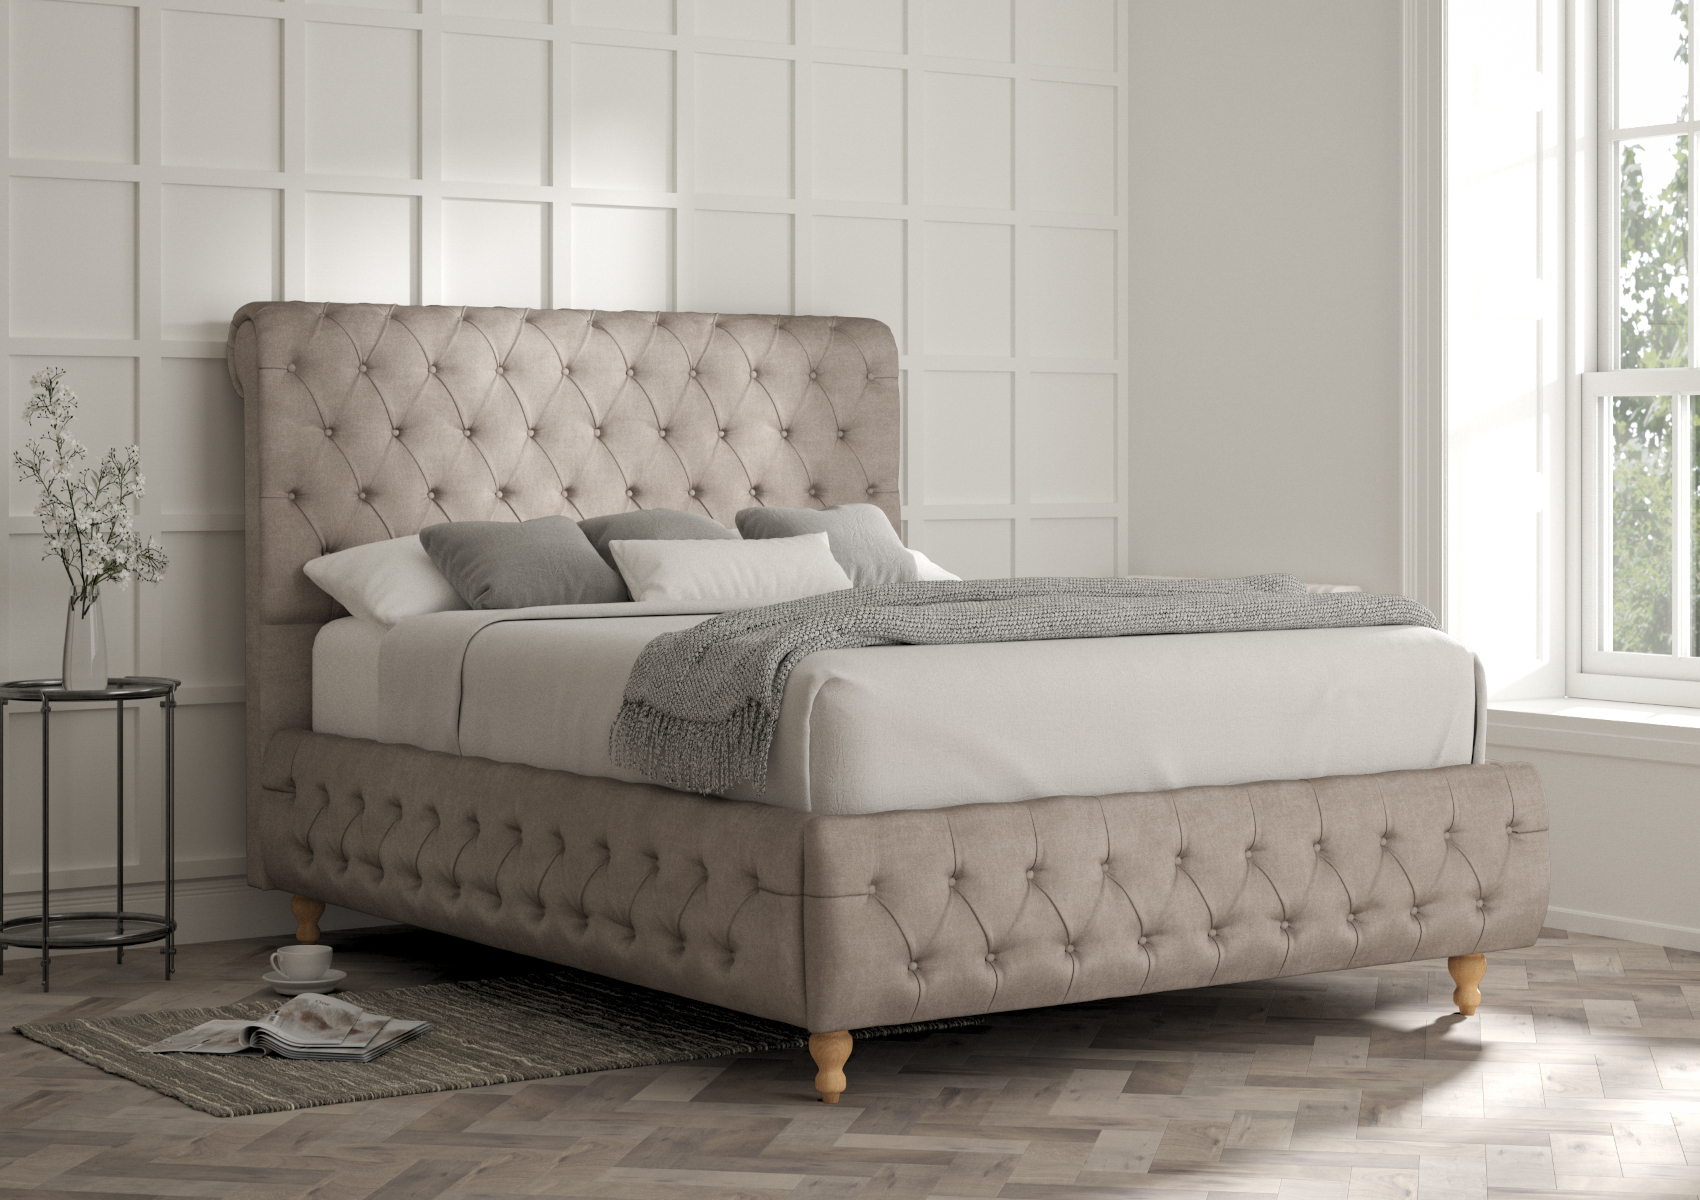 View Billy Savannah Almond Upholstered Super King Bed Time4Sleep information